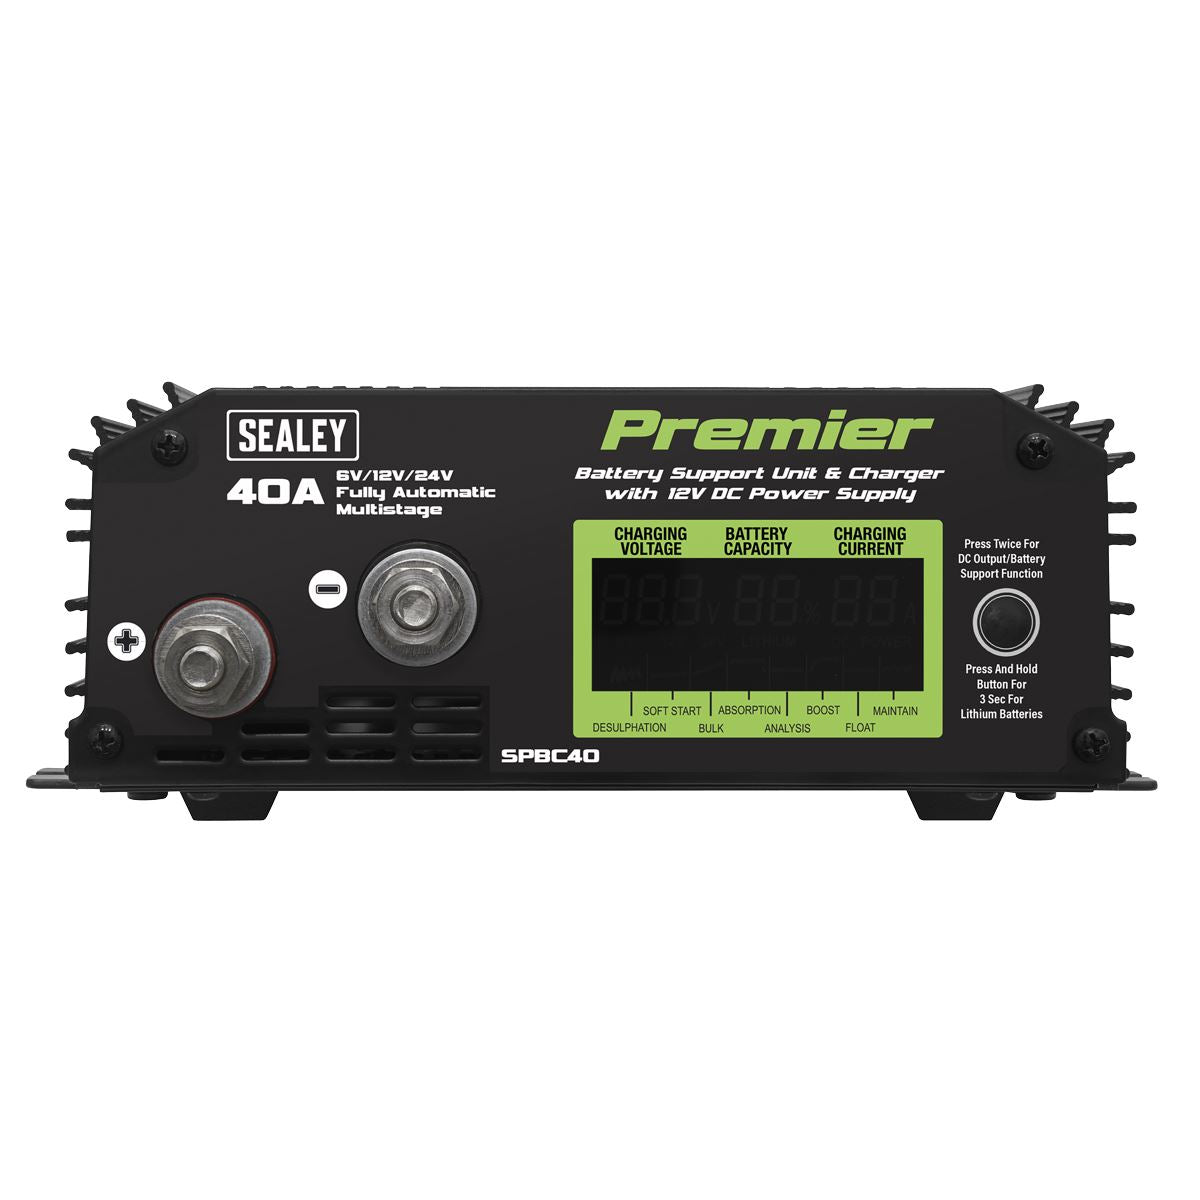 Sealey Premier Battery Support Unit Charger & Maintainer 40A